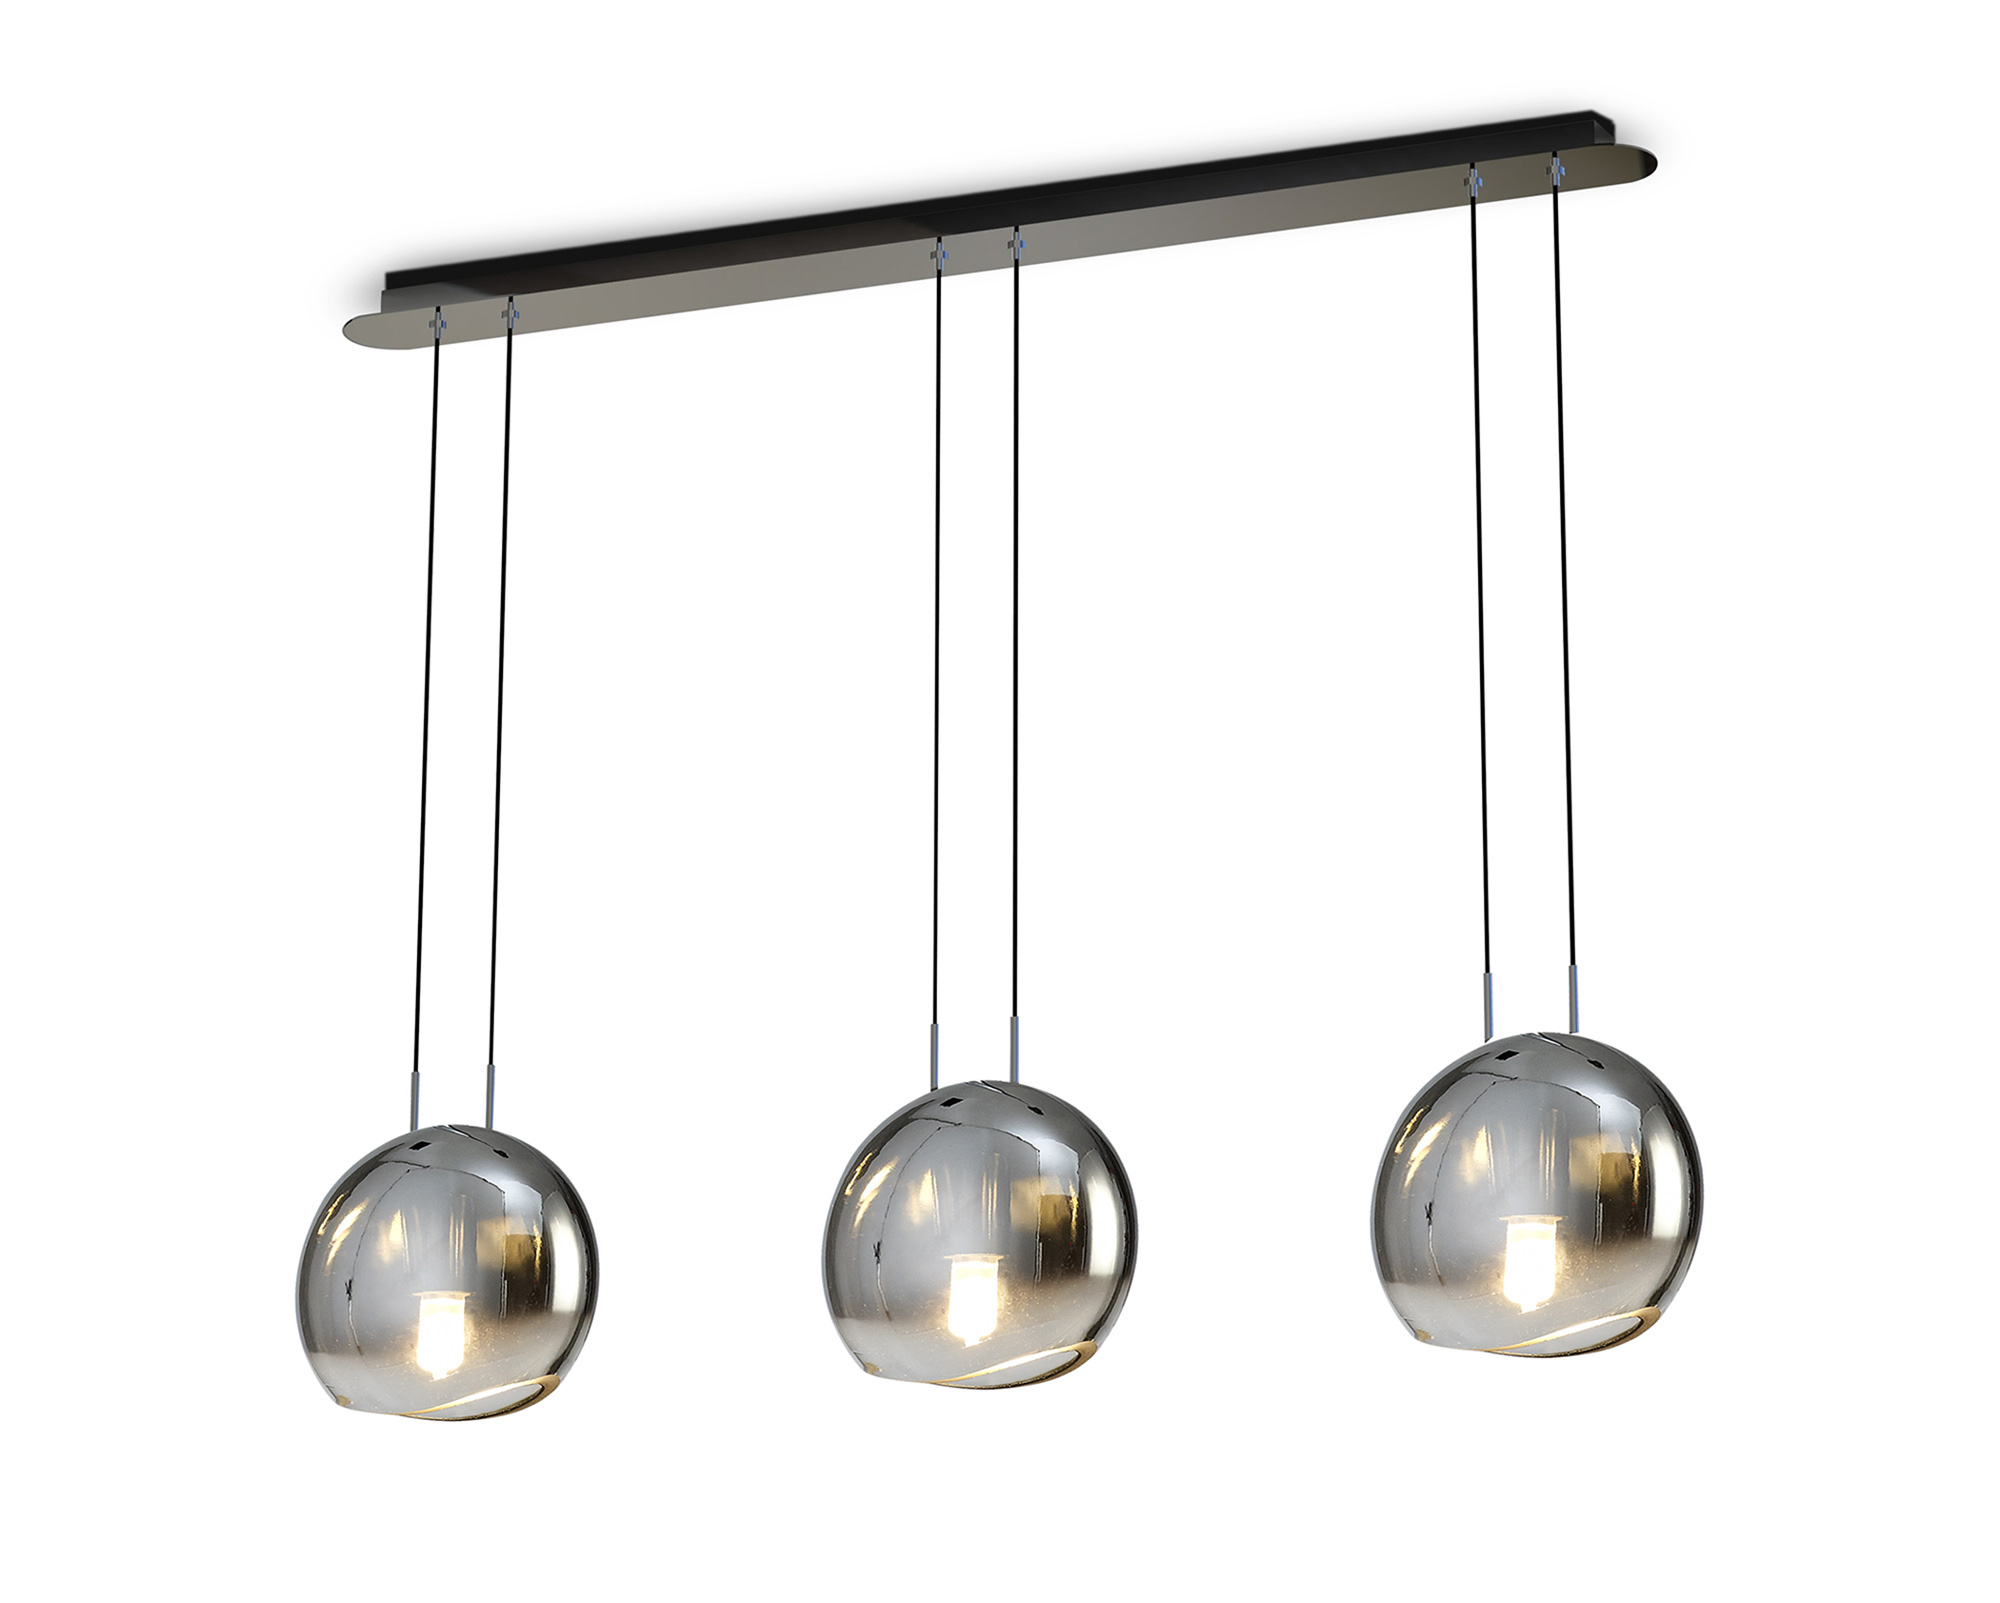 Lens Ceiling Lights Mantra Linear Fittings